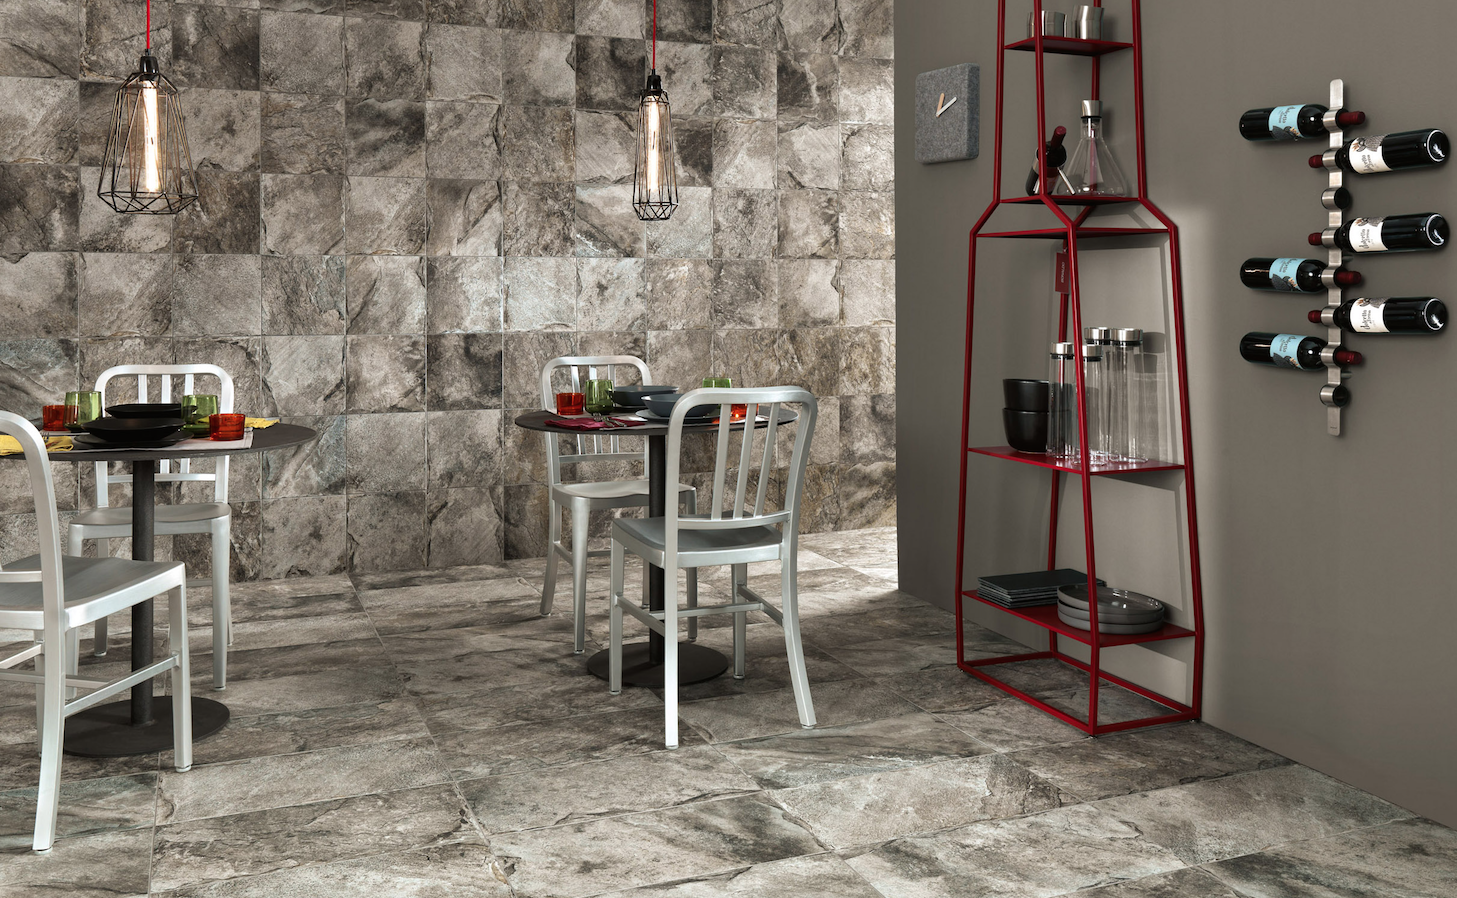 How to Choose the Right Stone Look Stoneware Floor Tiles for Your Home?